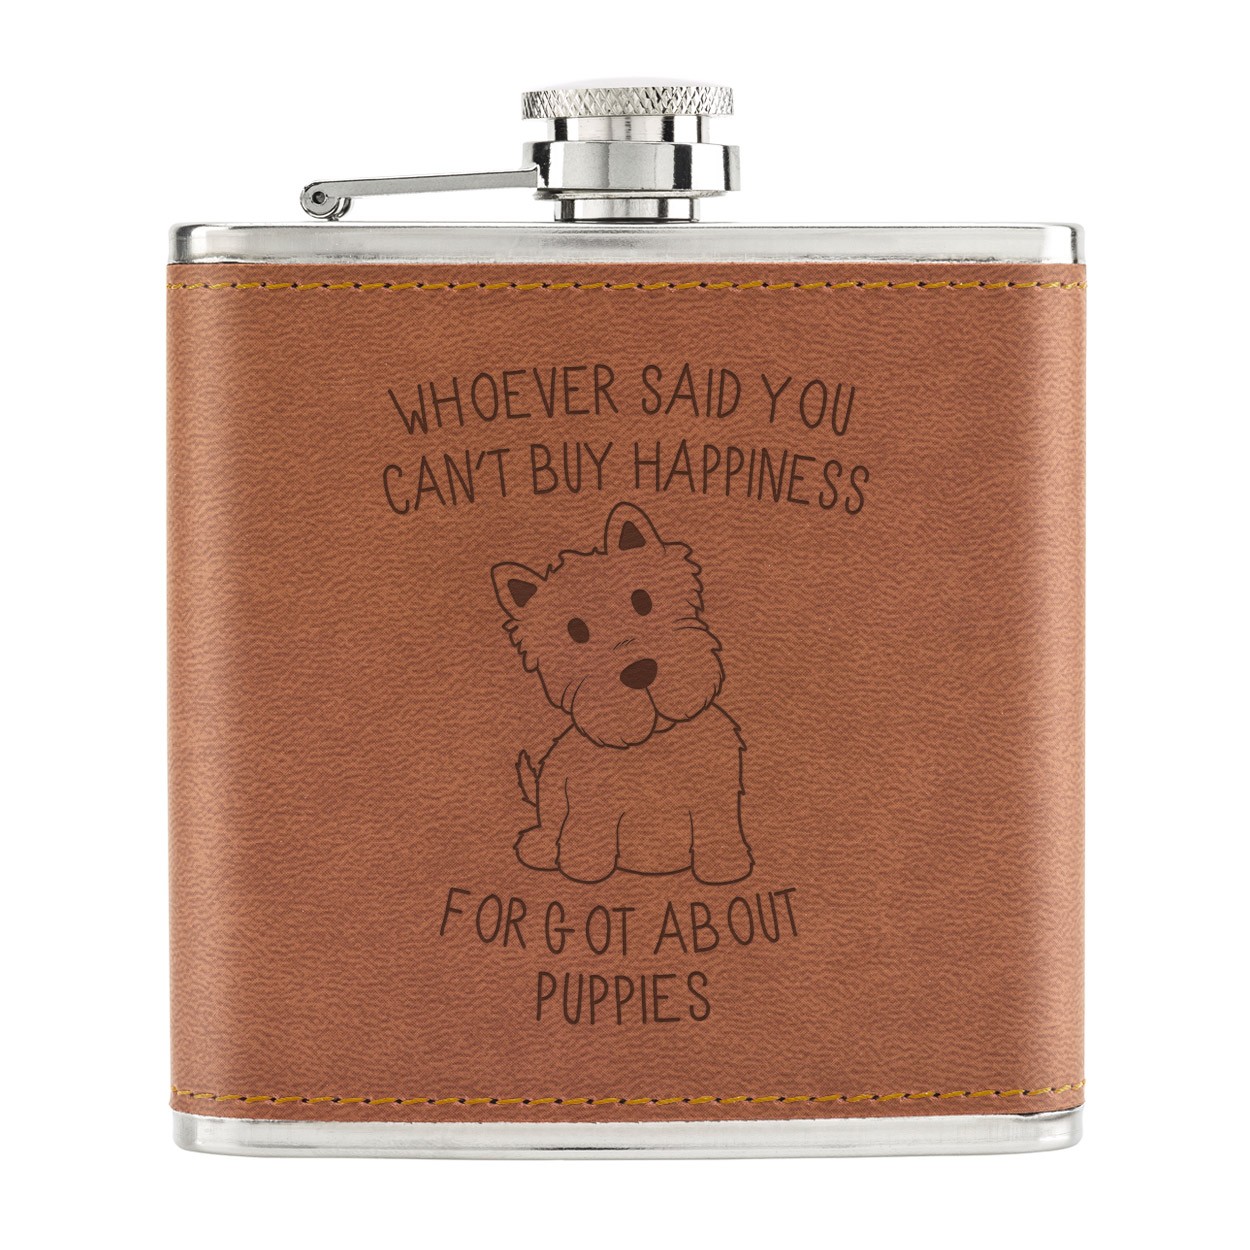 Whoever Said You Can't Buy Happiness Forgot About Puppies 6oz PU Leather Hip Flask Tan